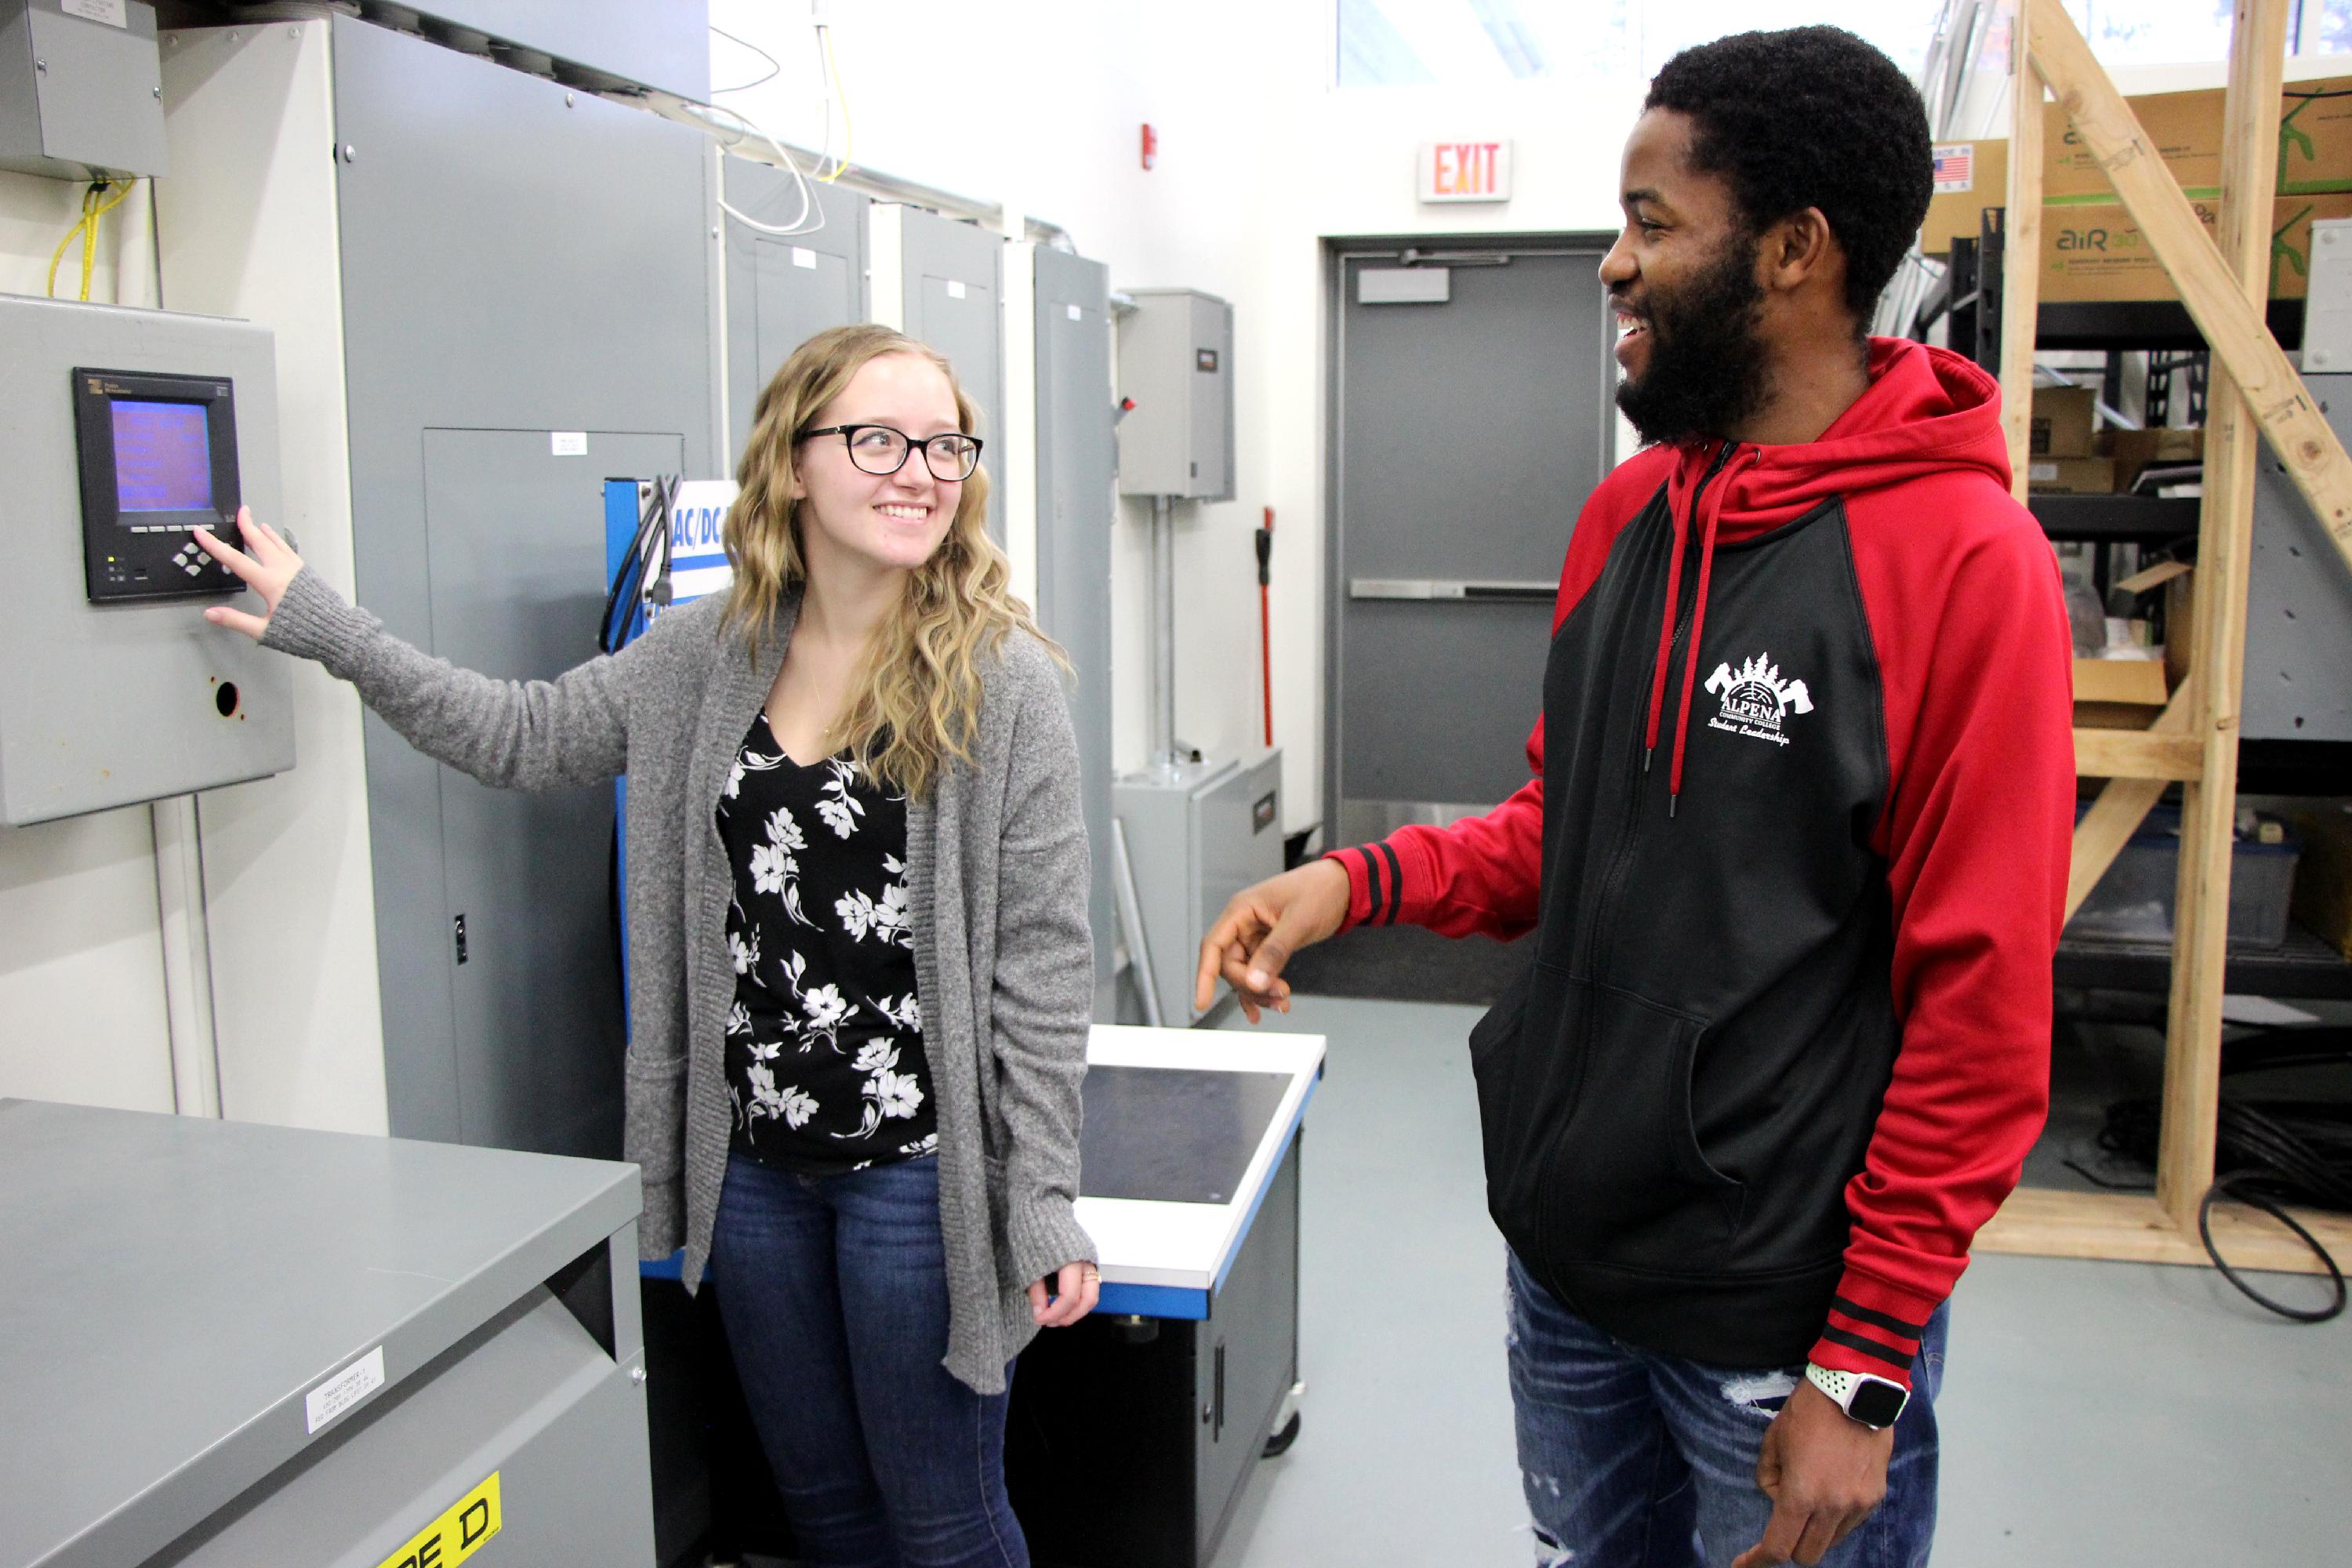 Adrianna and Musa examine an electrical panel